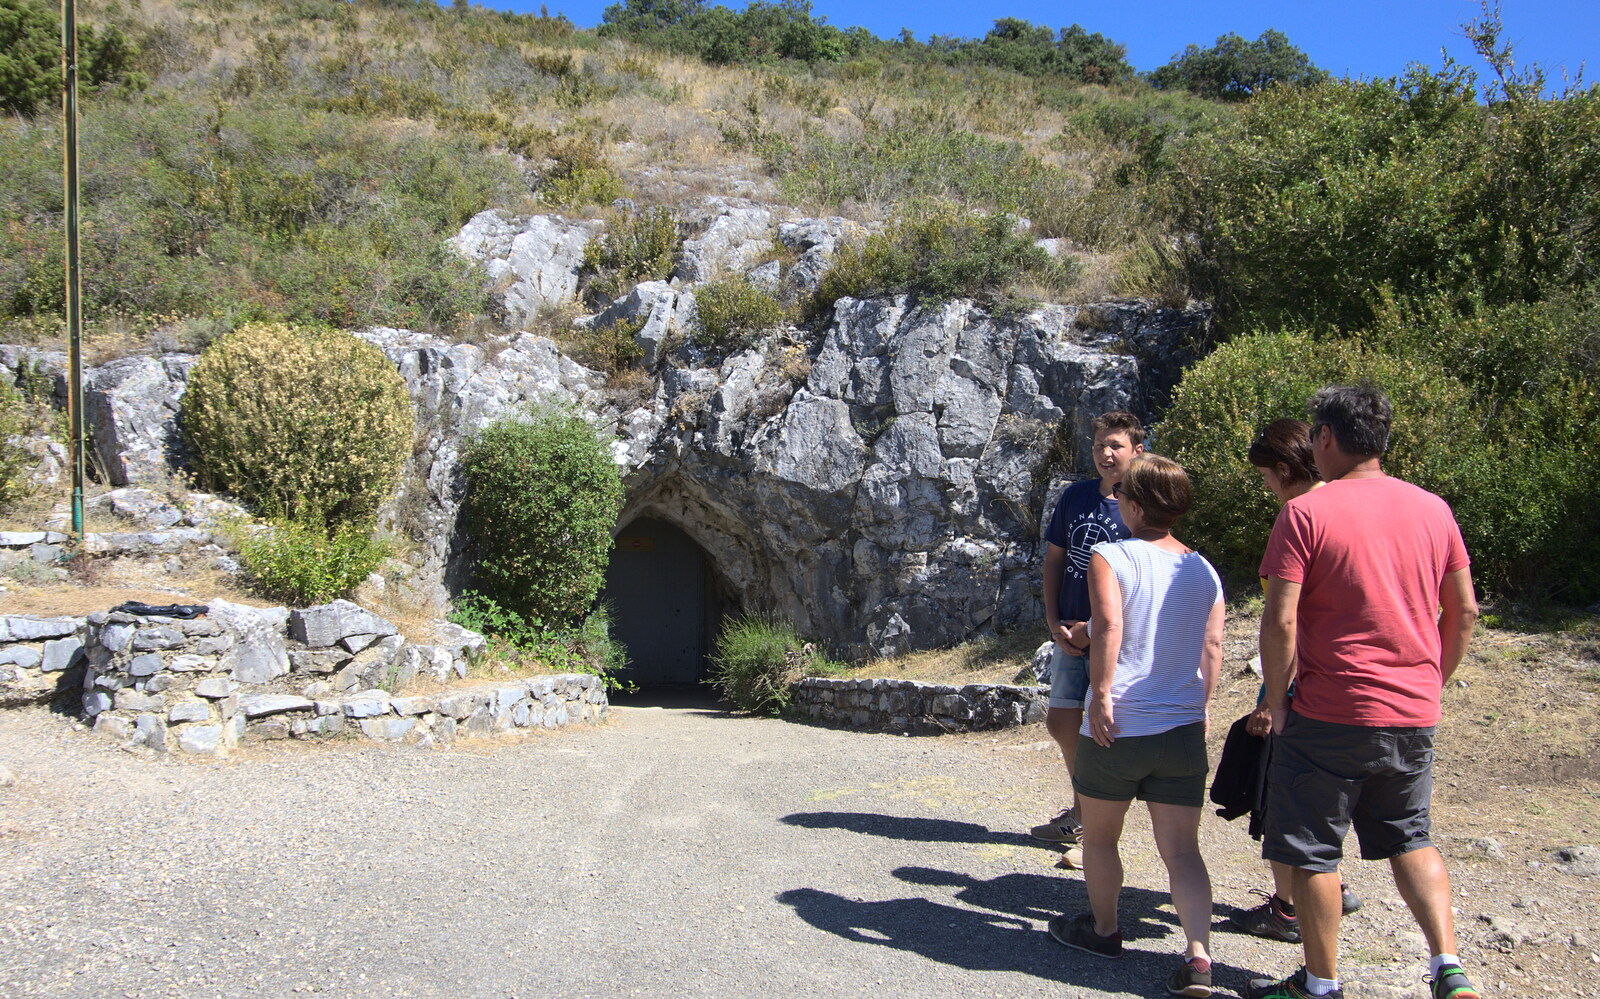 The tour group assembles by a small door to the cave from Le Gouffre Géant and Grotte de Limousis, Petanque and a Lightning Storm, Languedoc, France - 12th August 2018